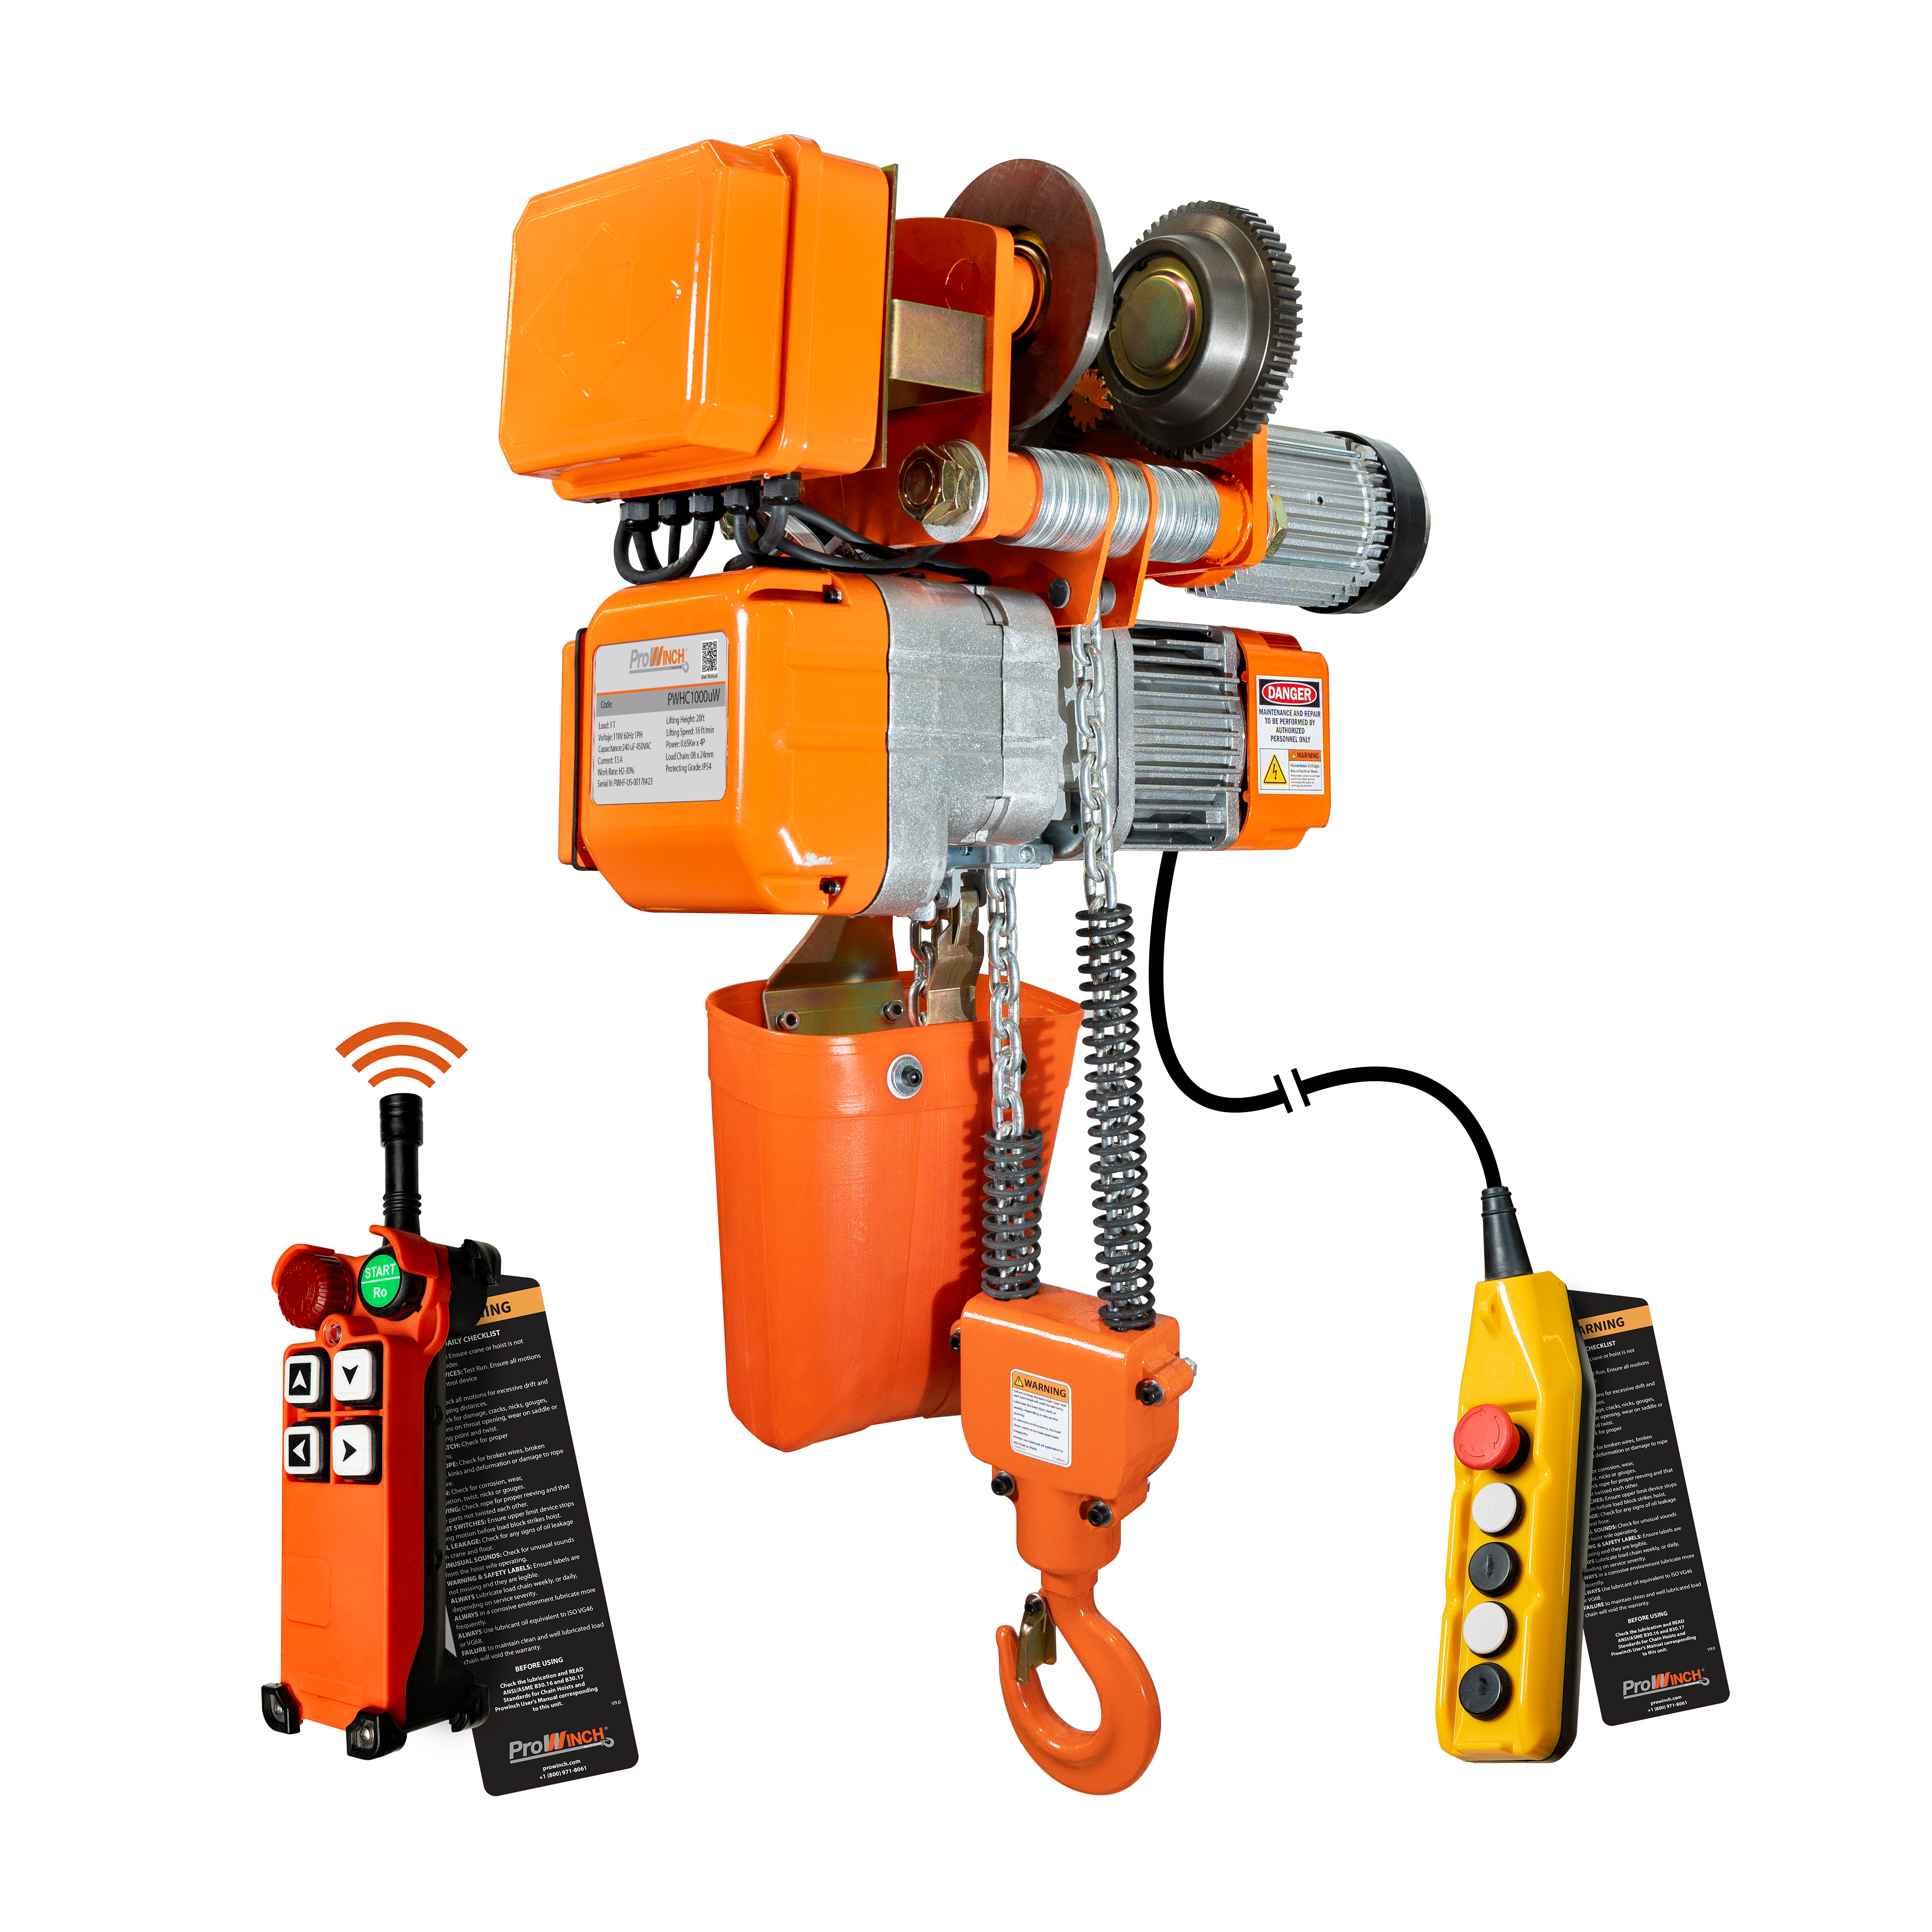 Prowinch 1 Ton Electric Chain Hoist Power Trolley 20 ft. G80 Chain M3/H2 110~120V Wireless